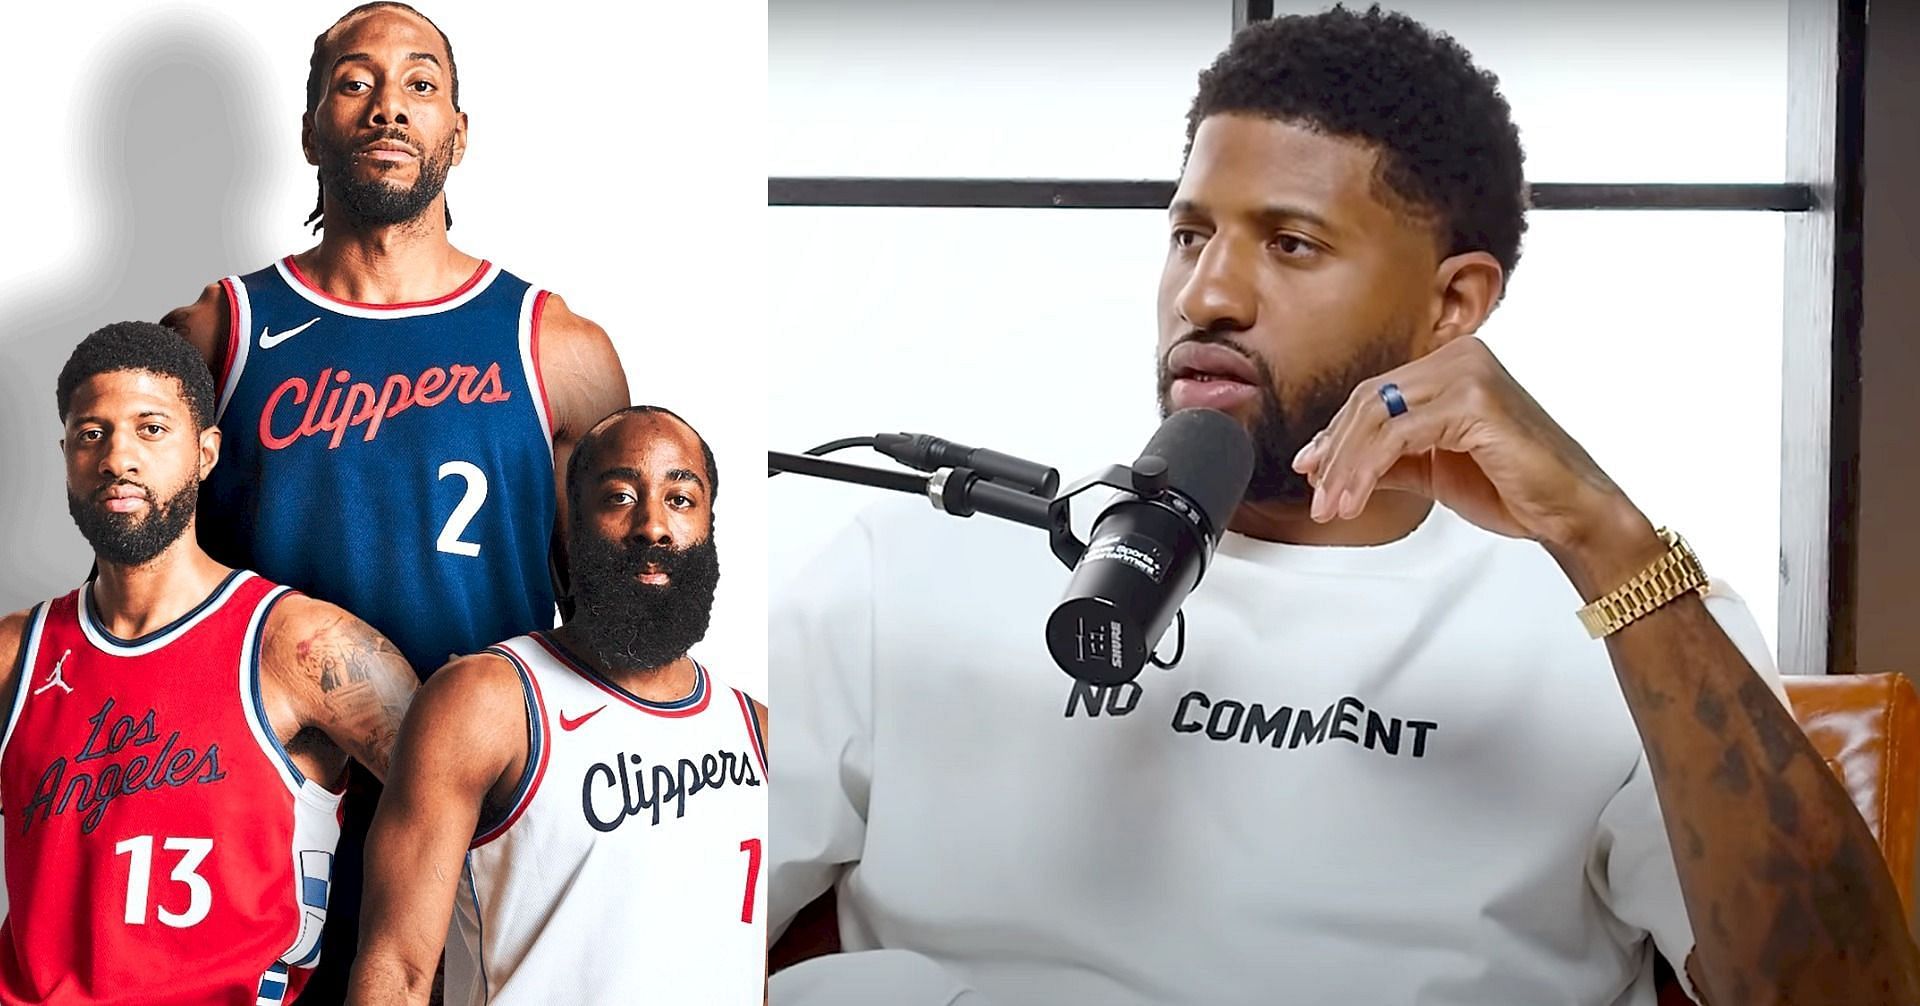 Paul George hints at Clippers extension being imminent after revealing contribution to franchise rebrand